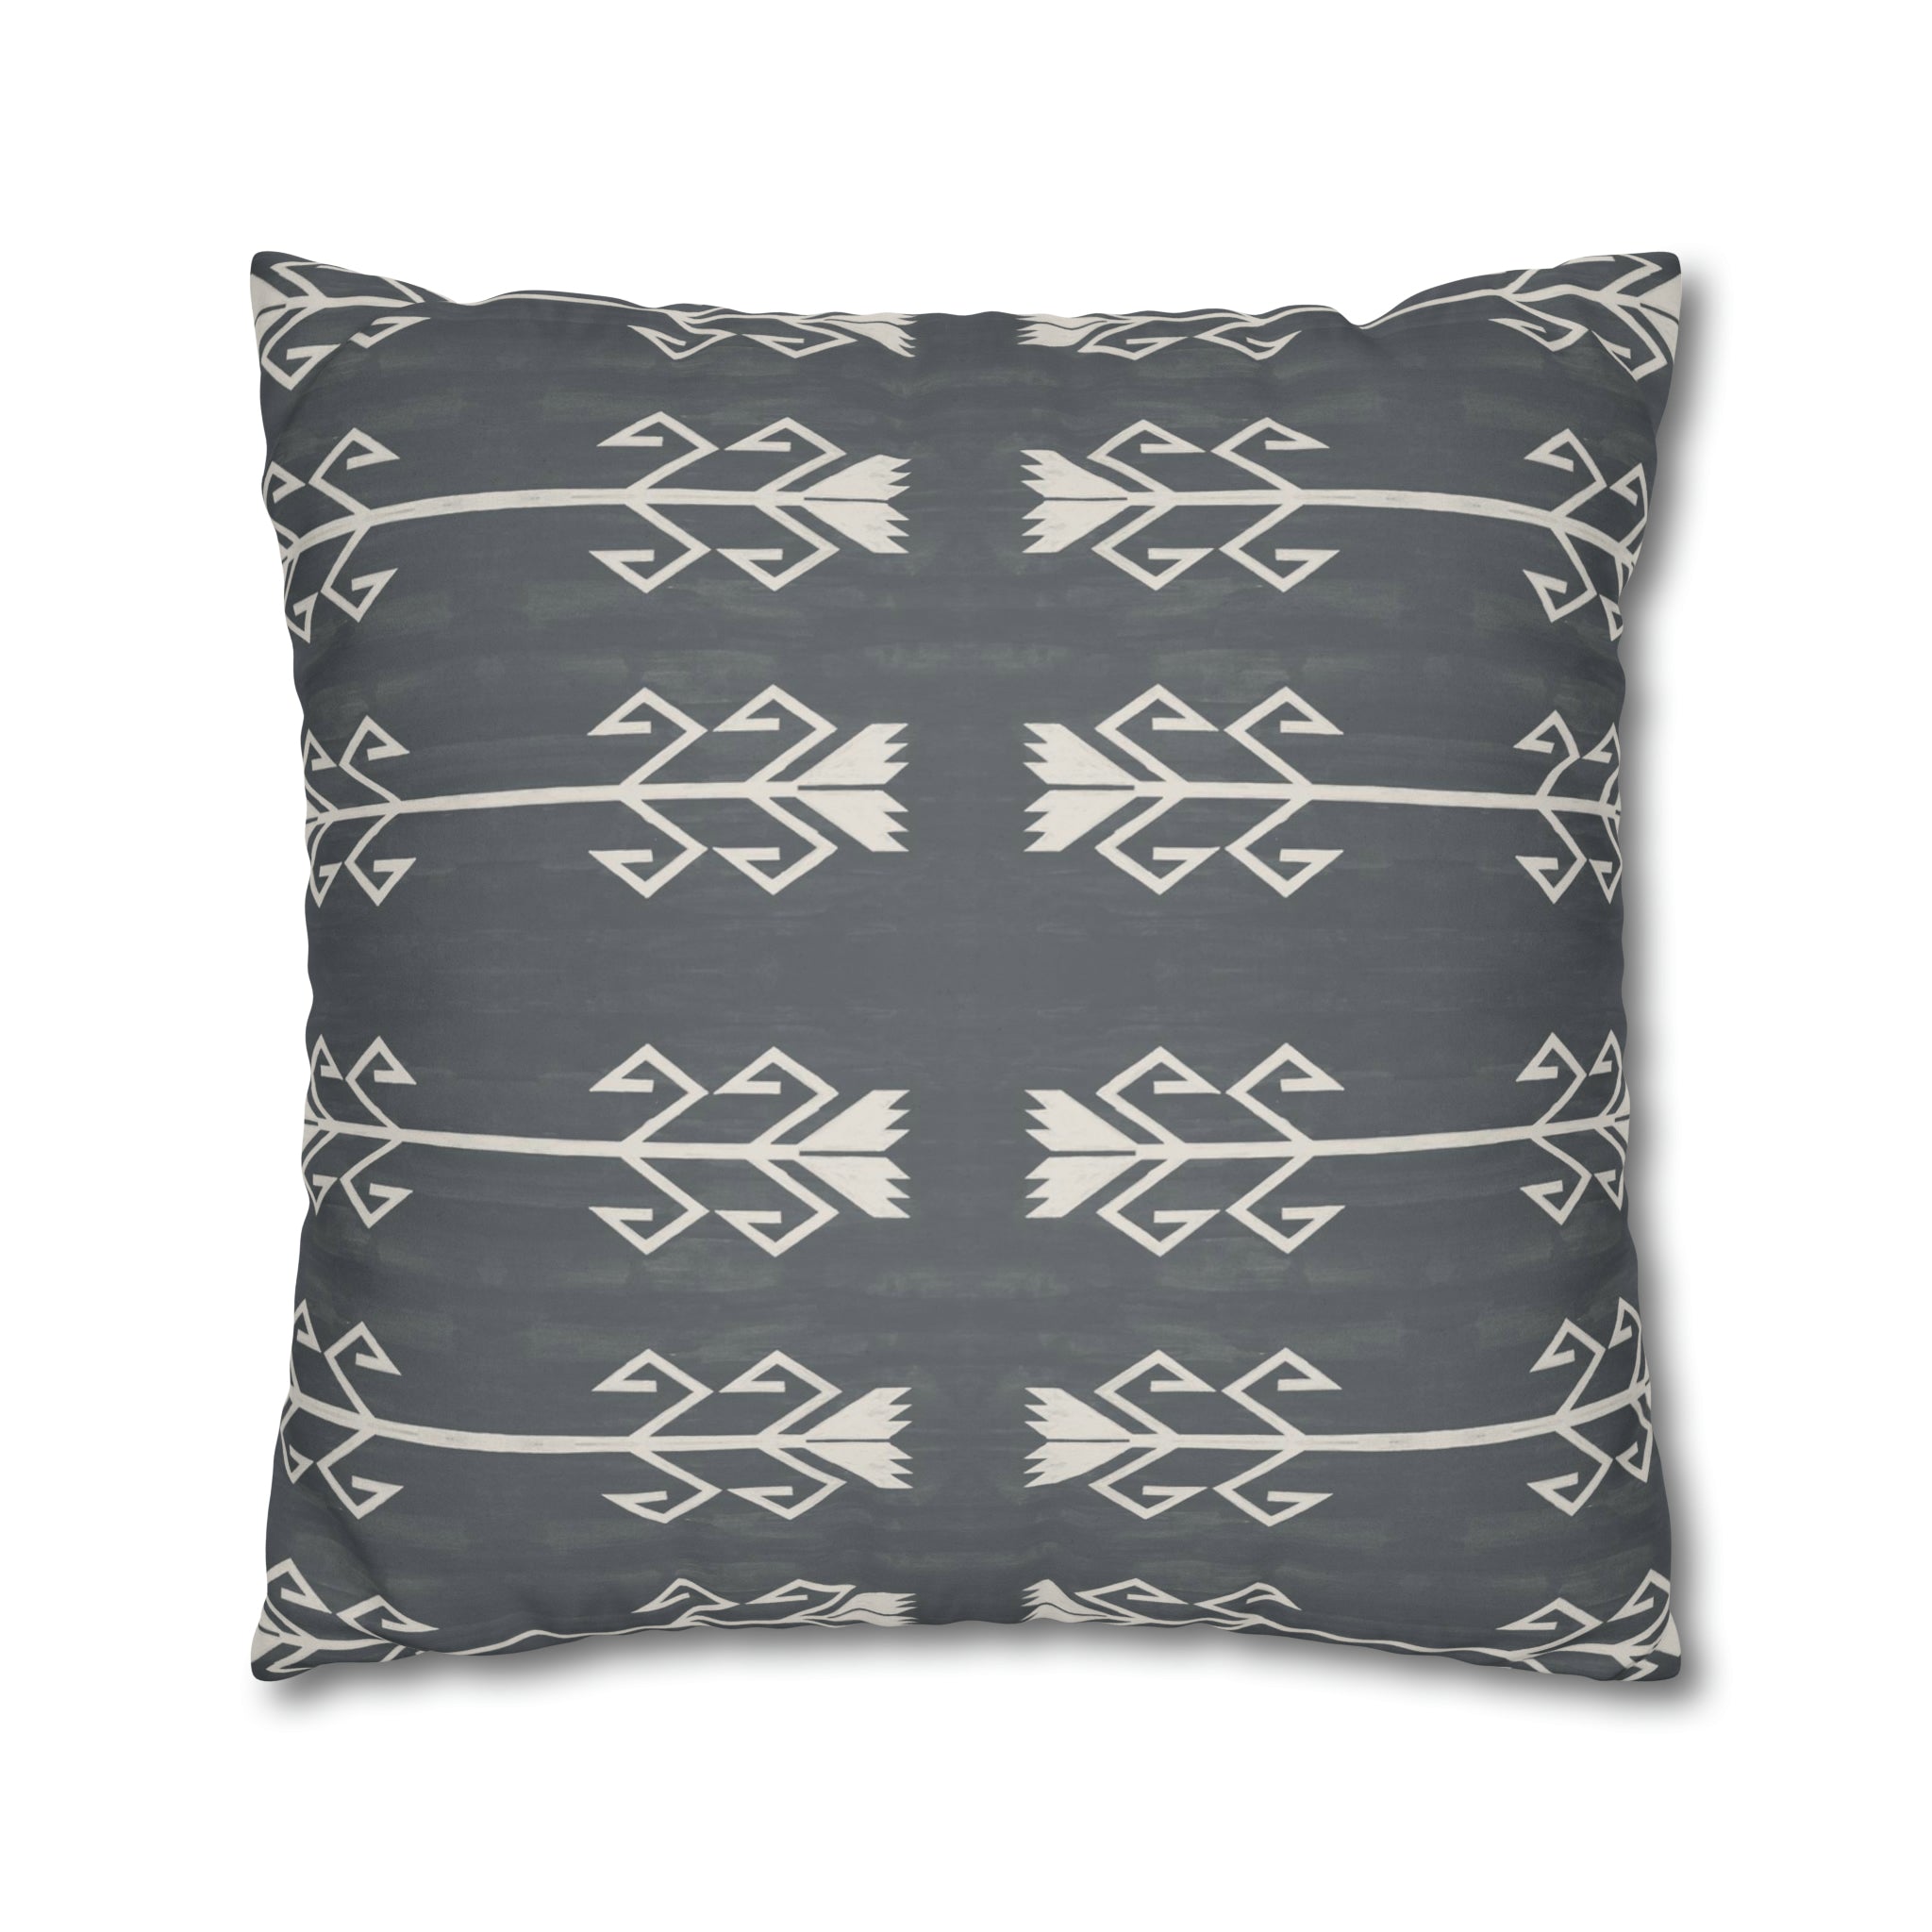 Maricopa Microsuede Square Pillow Cover